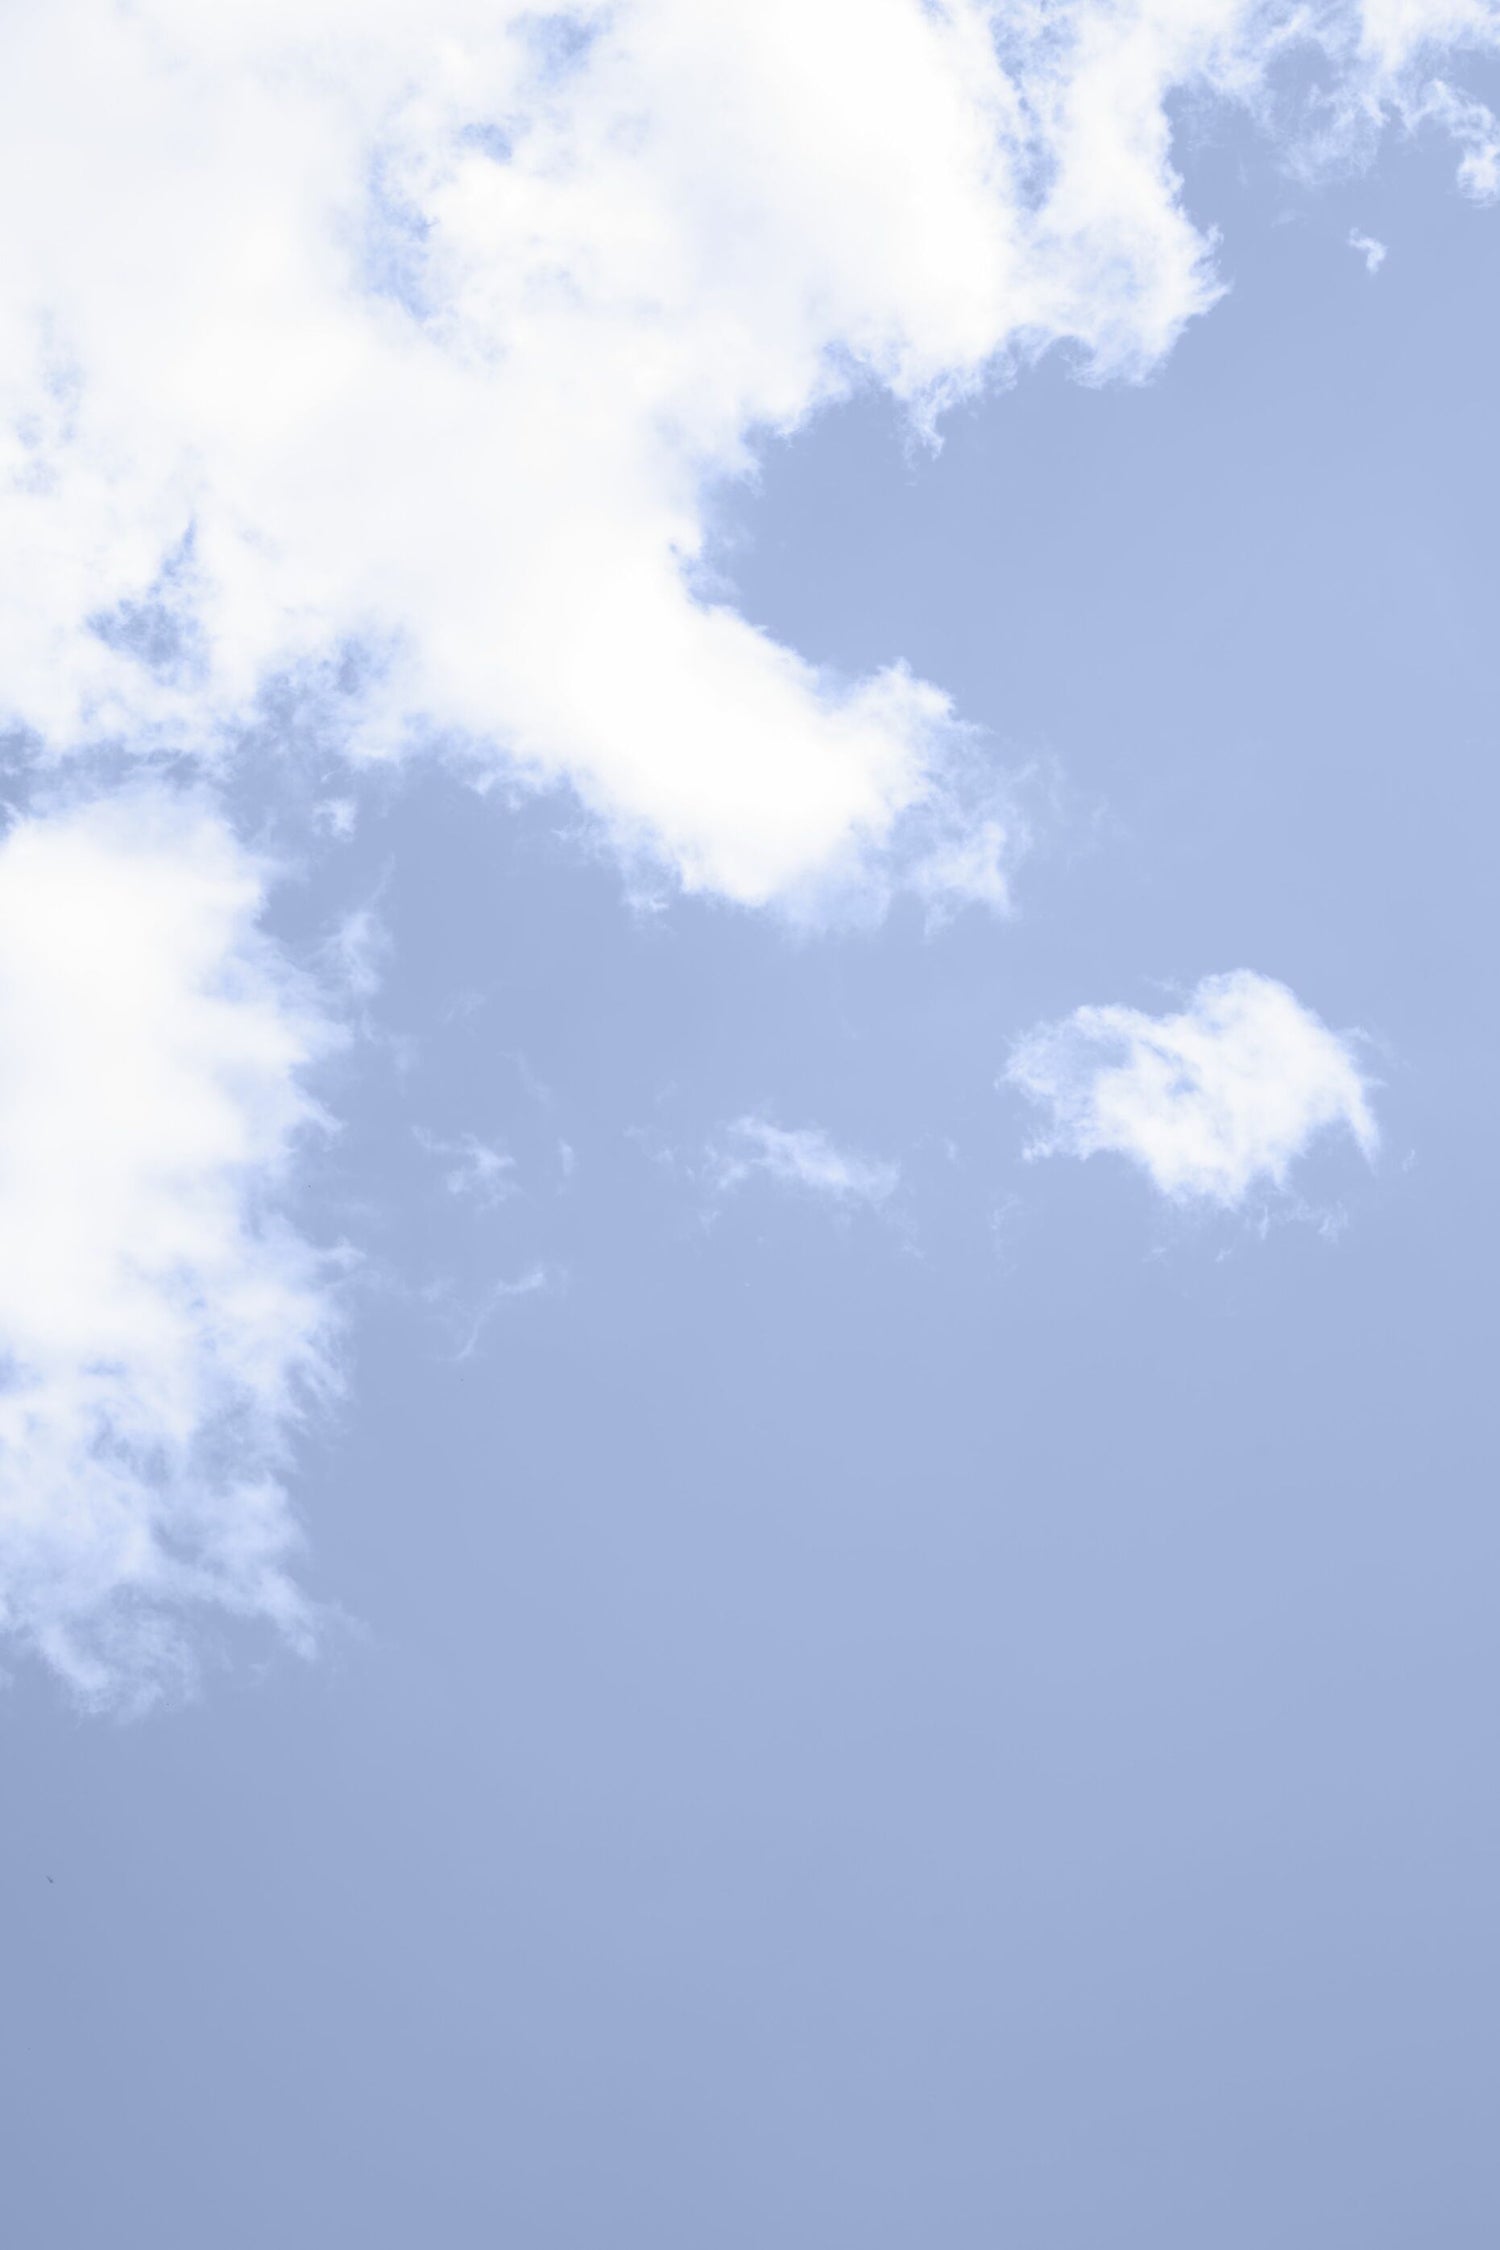 Background image of a photo of a blue sky with white clouds in the upper left half of image.